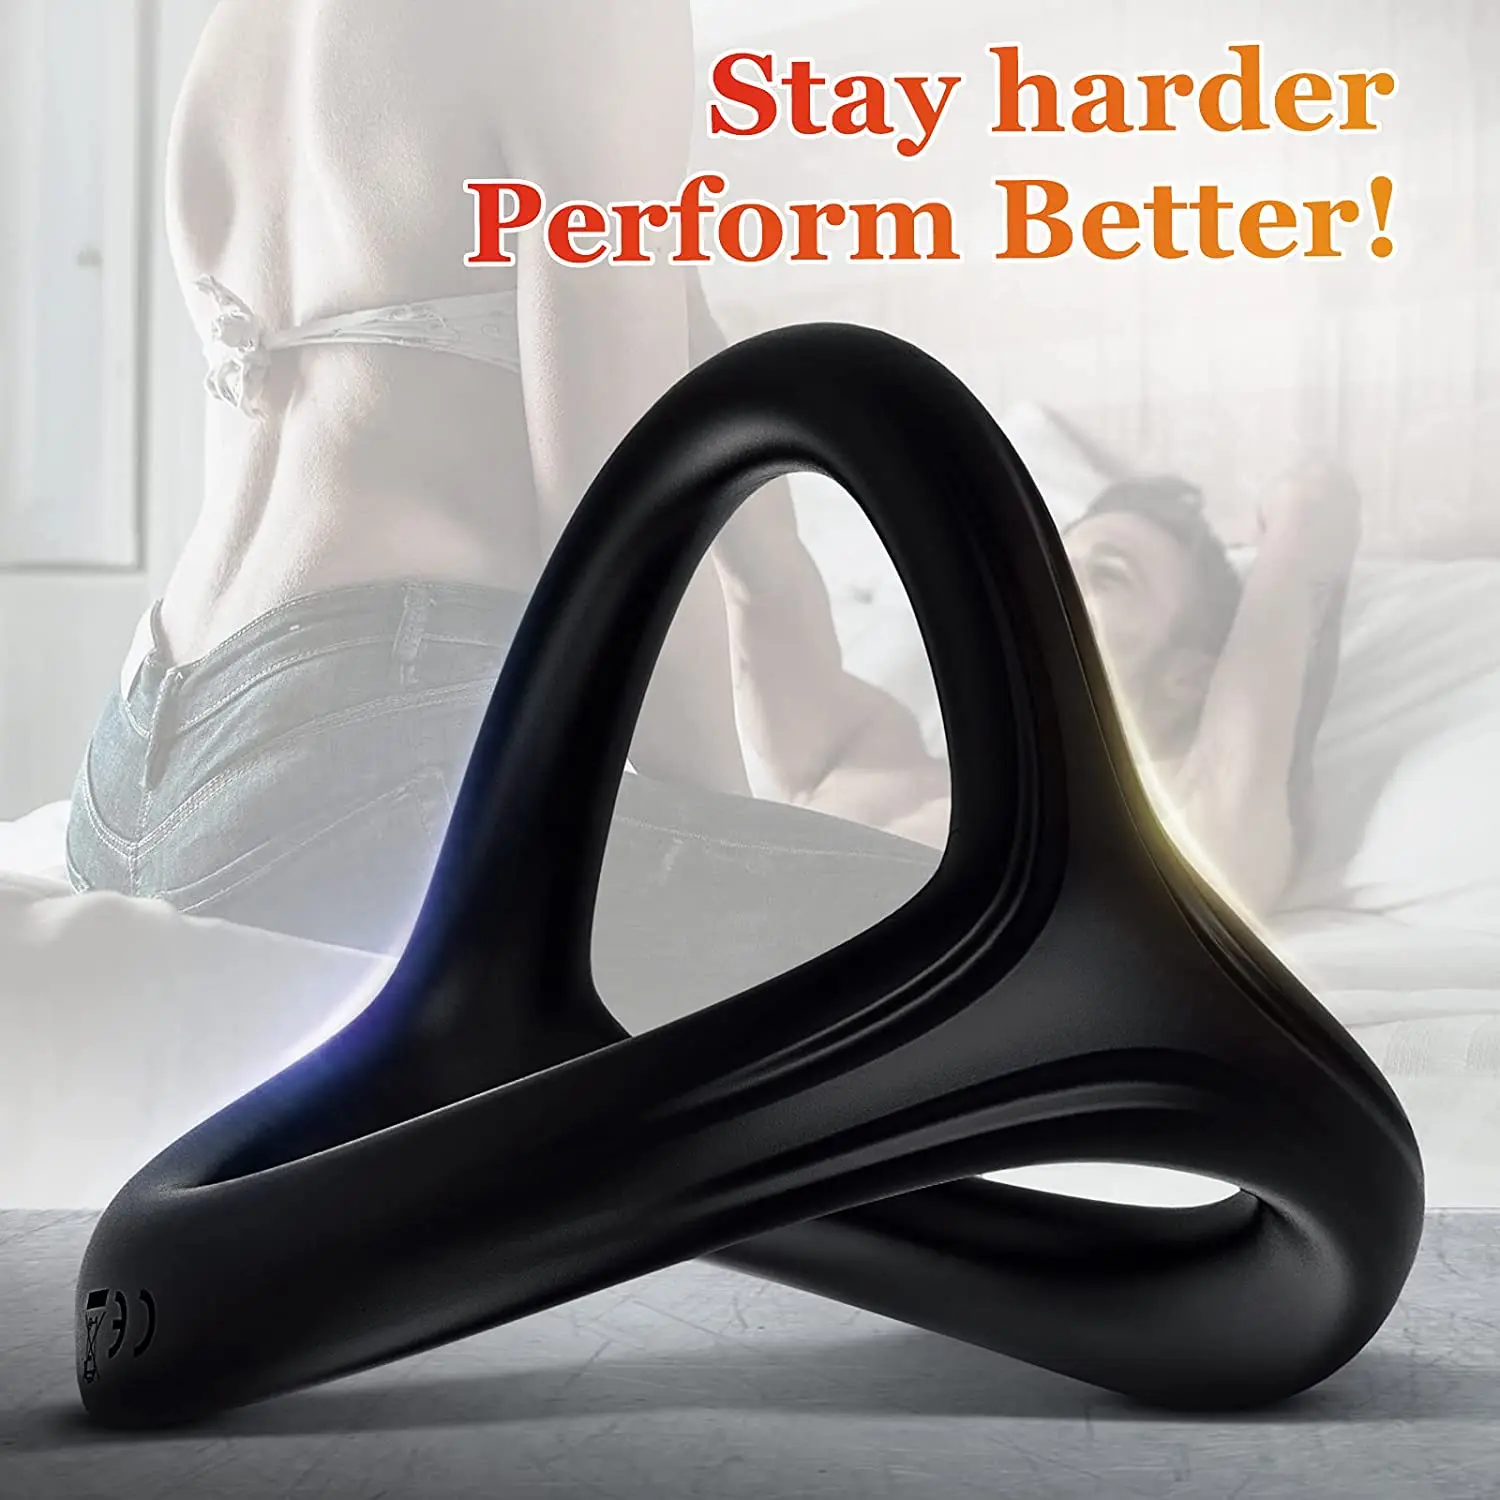 Silicone Penis Ring for Men, Adorime 3 in 1 Ultra Soft Stretchy Cock Ring,  Sex Toy for Men, Luminous